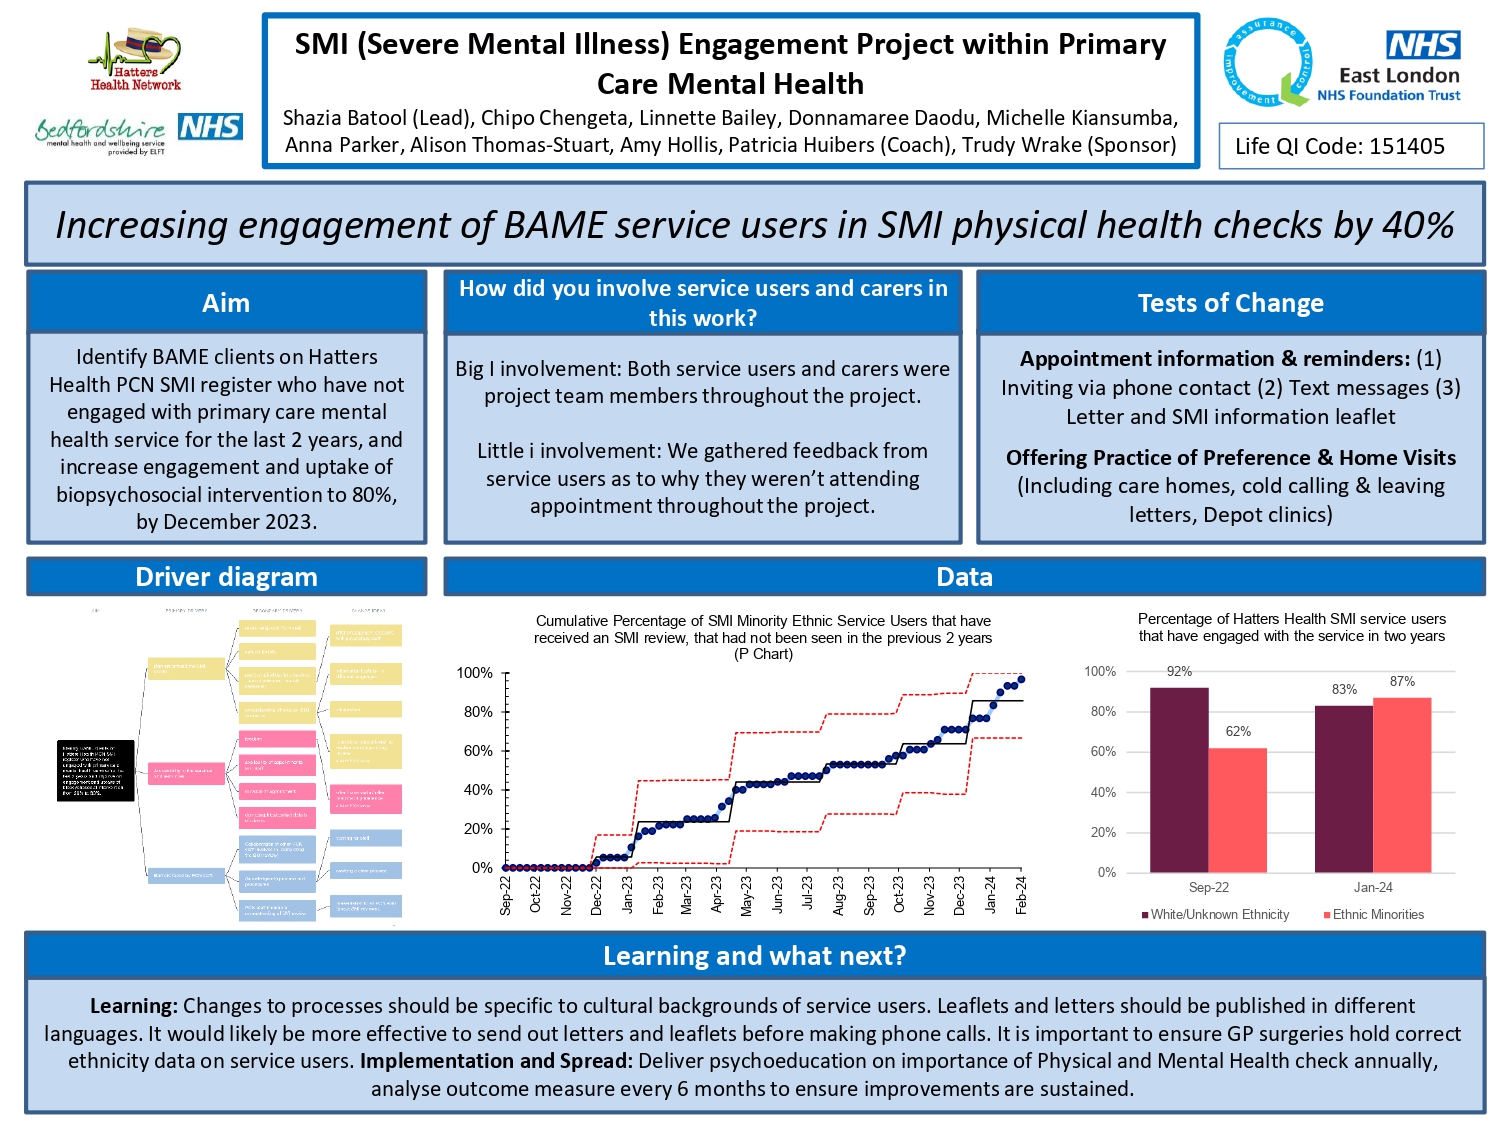 Poster about QI project, presented to the Institute for Healthcare Improvement during its annual visit to ELFT. 